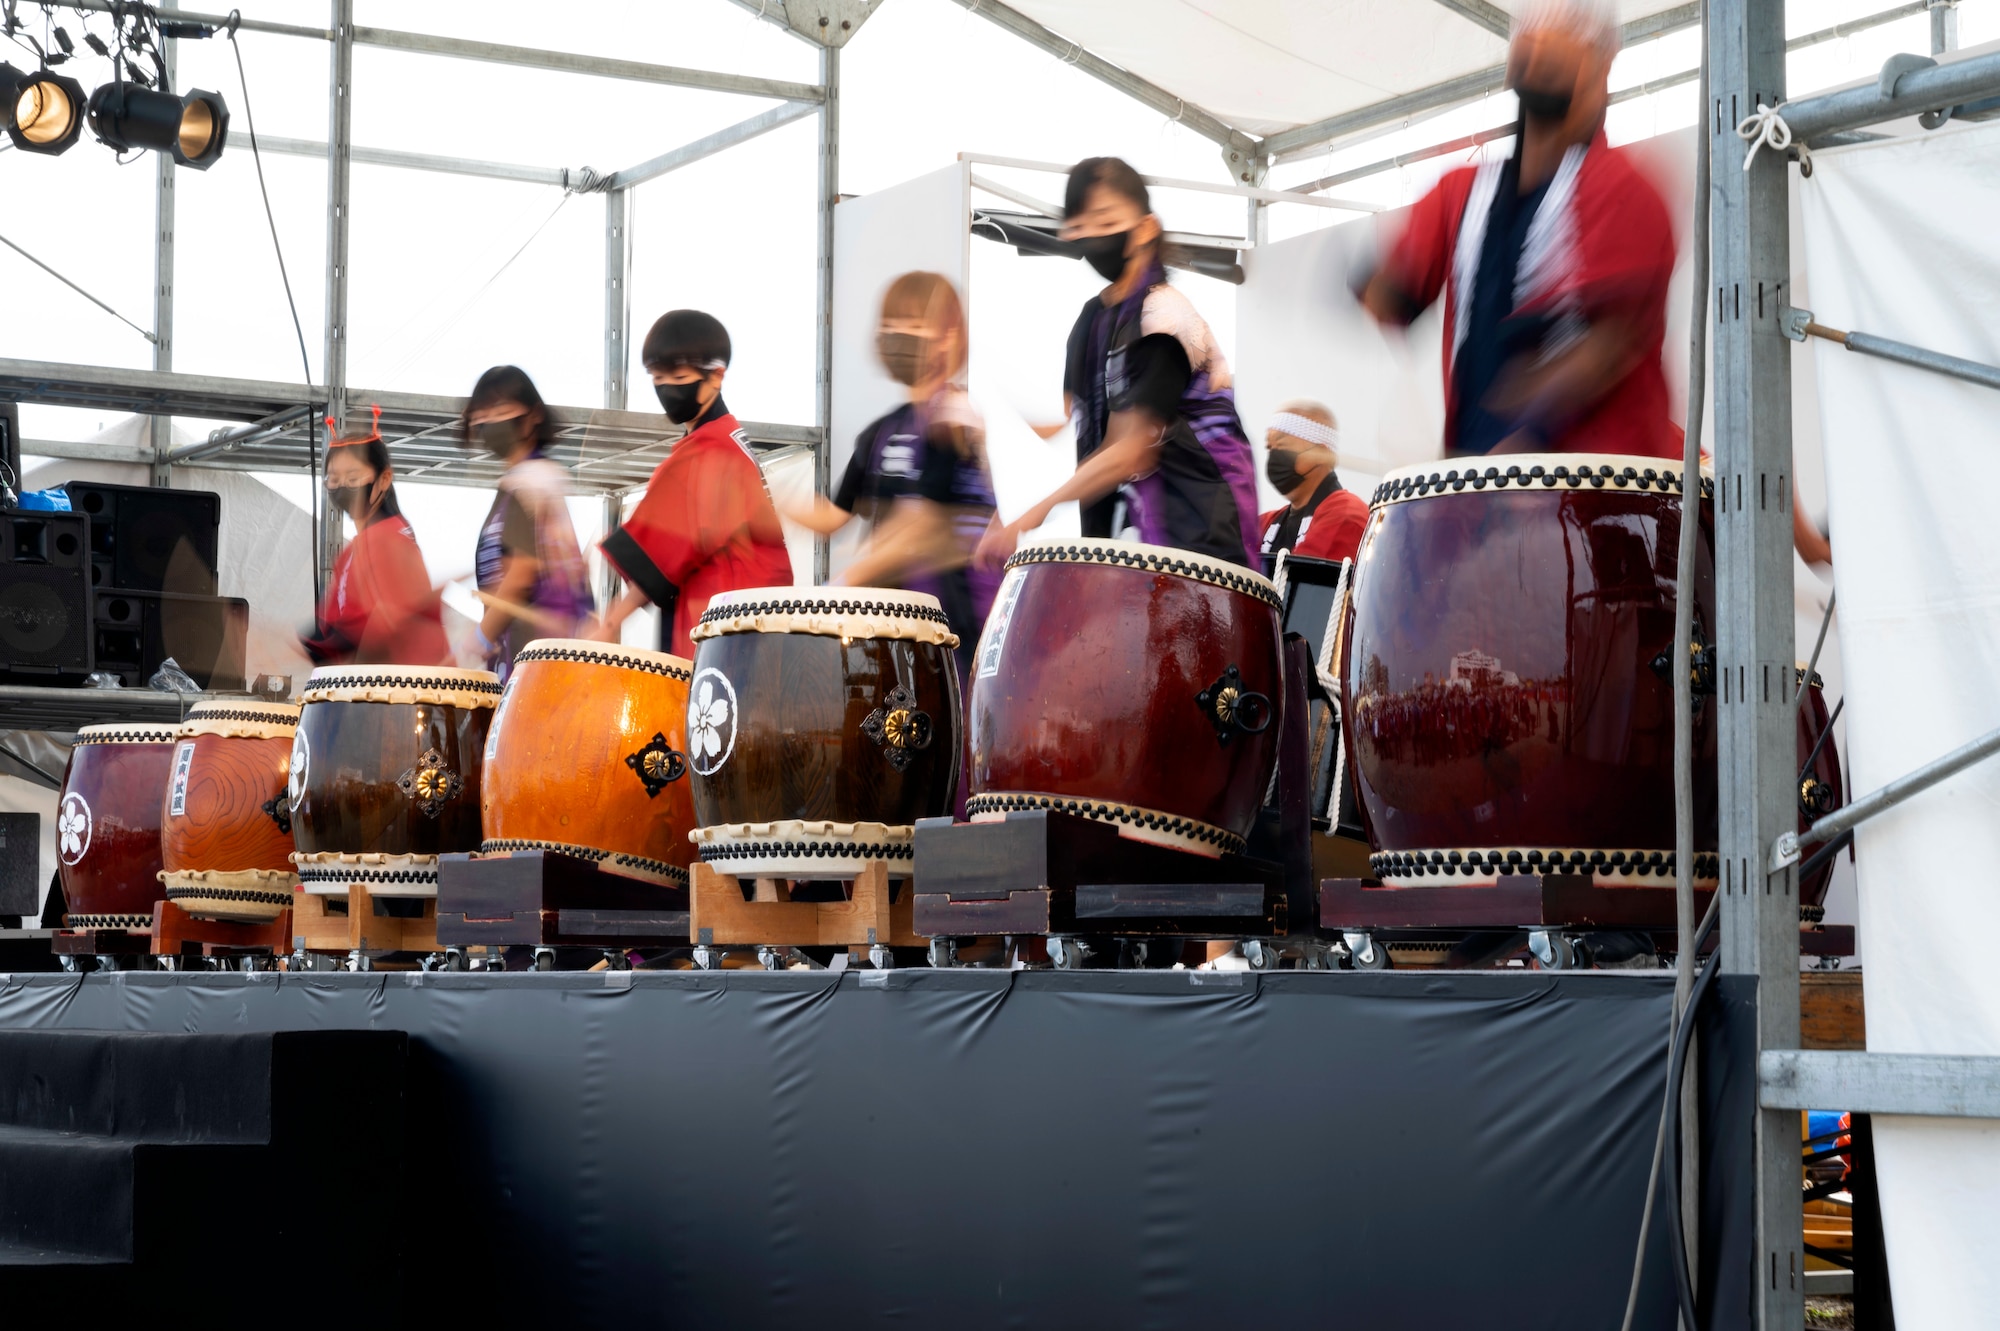 Taiko troupe plays large drums made out of barrels or tree trunks with cowhide covers to a crowd of Deedara Festival attendee. The musicians beat the drums in unison to produce loud, reverberating beats